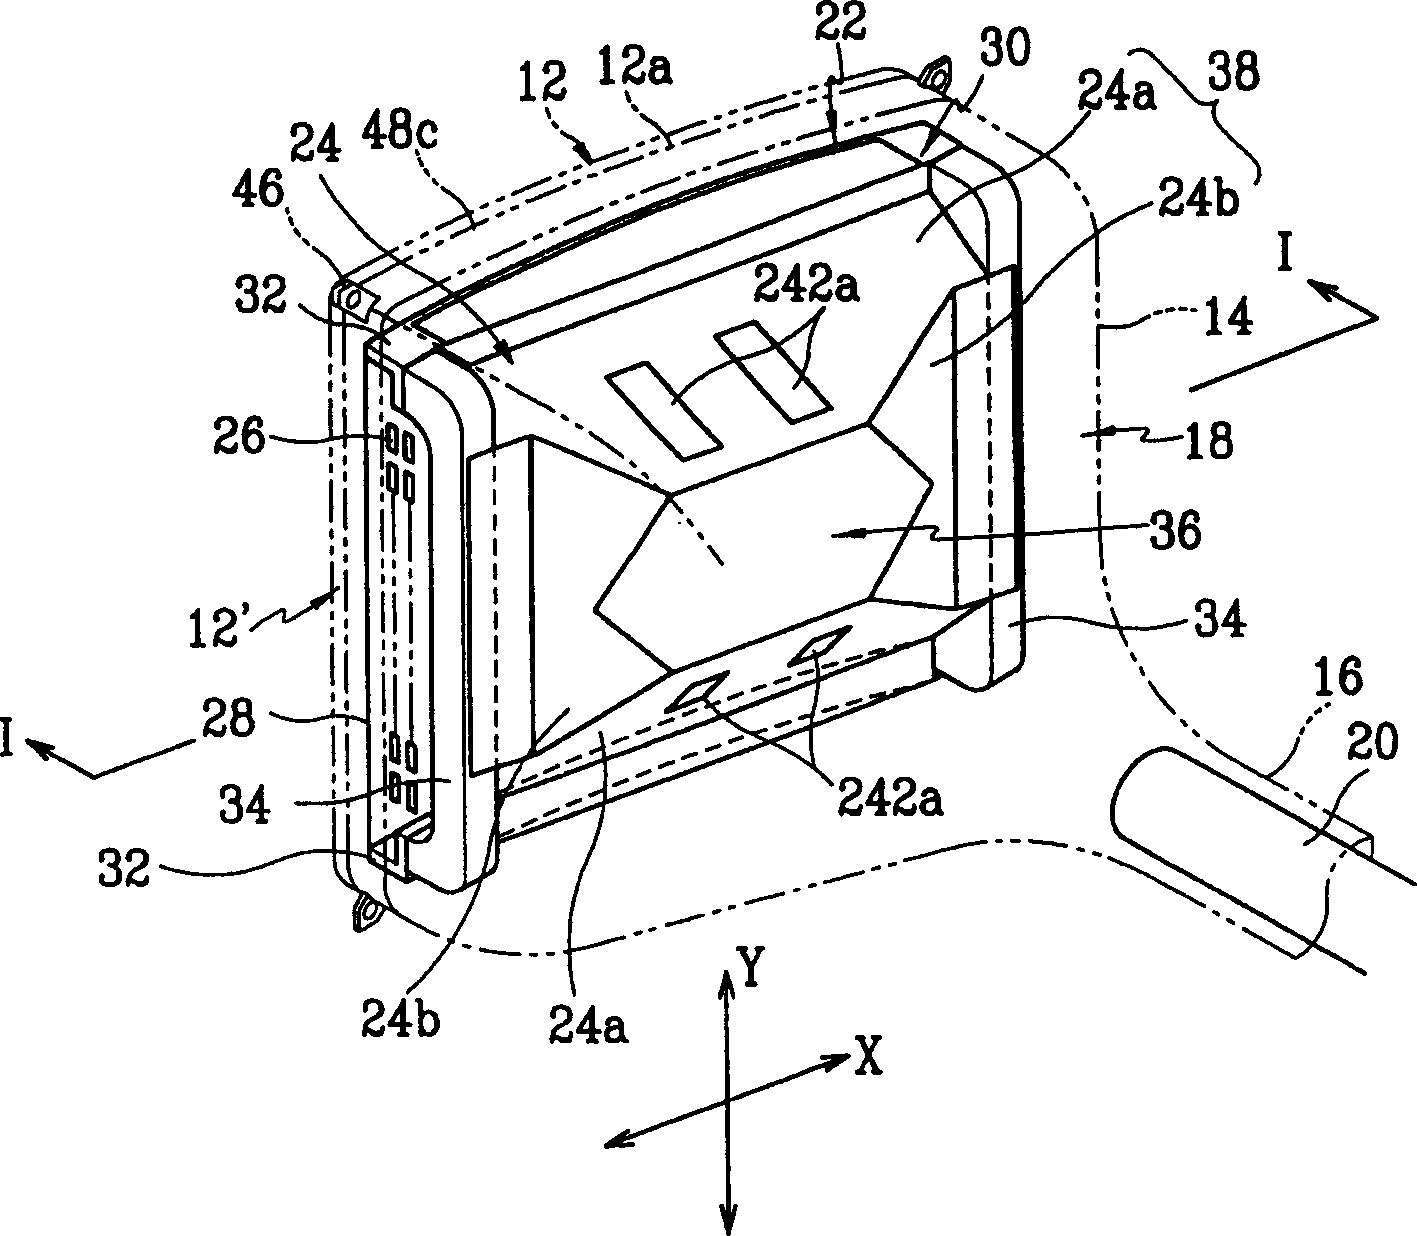 Cathode-ray tube with erasing coil capable of minimizing electronic beam change on screen